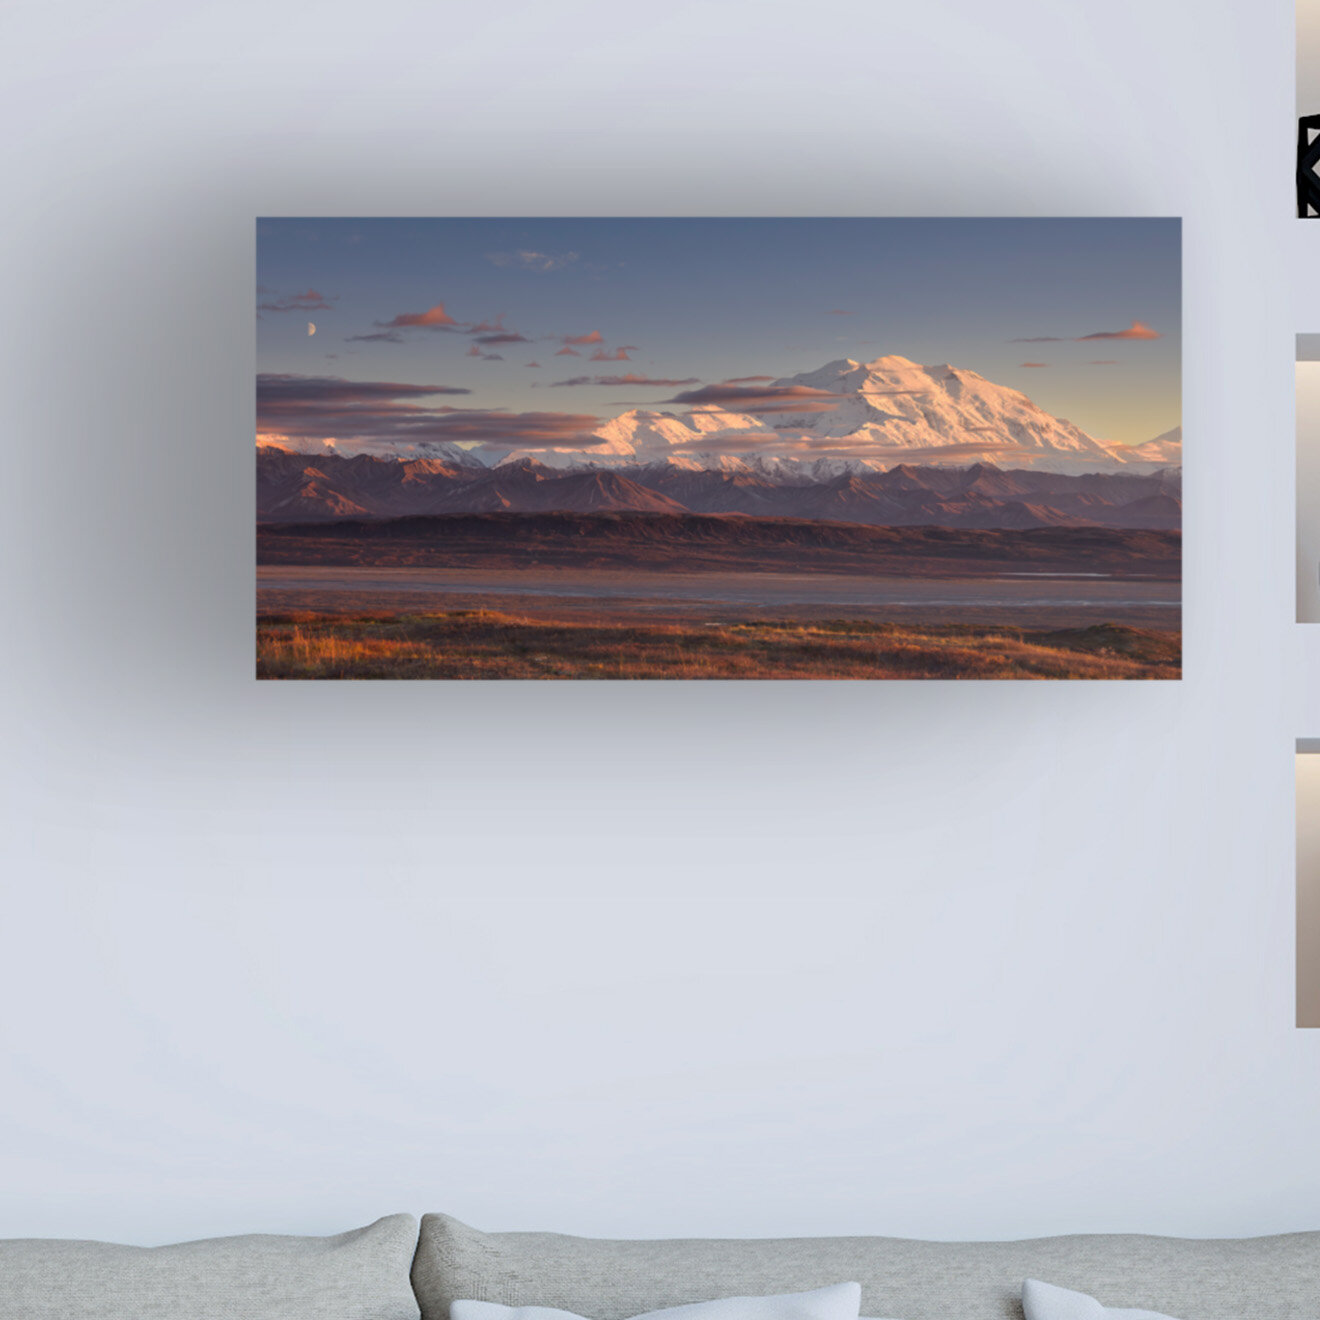 Denali National Park Wall Art Canvas Denali National Park Canvas Print Multiple Sizes Wrapped Canvas on Wooden Frame